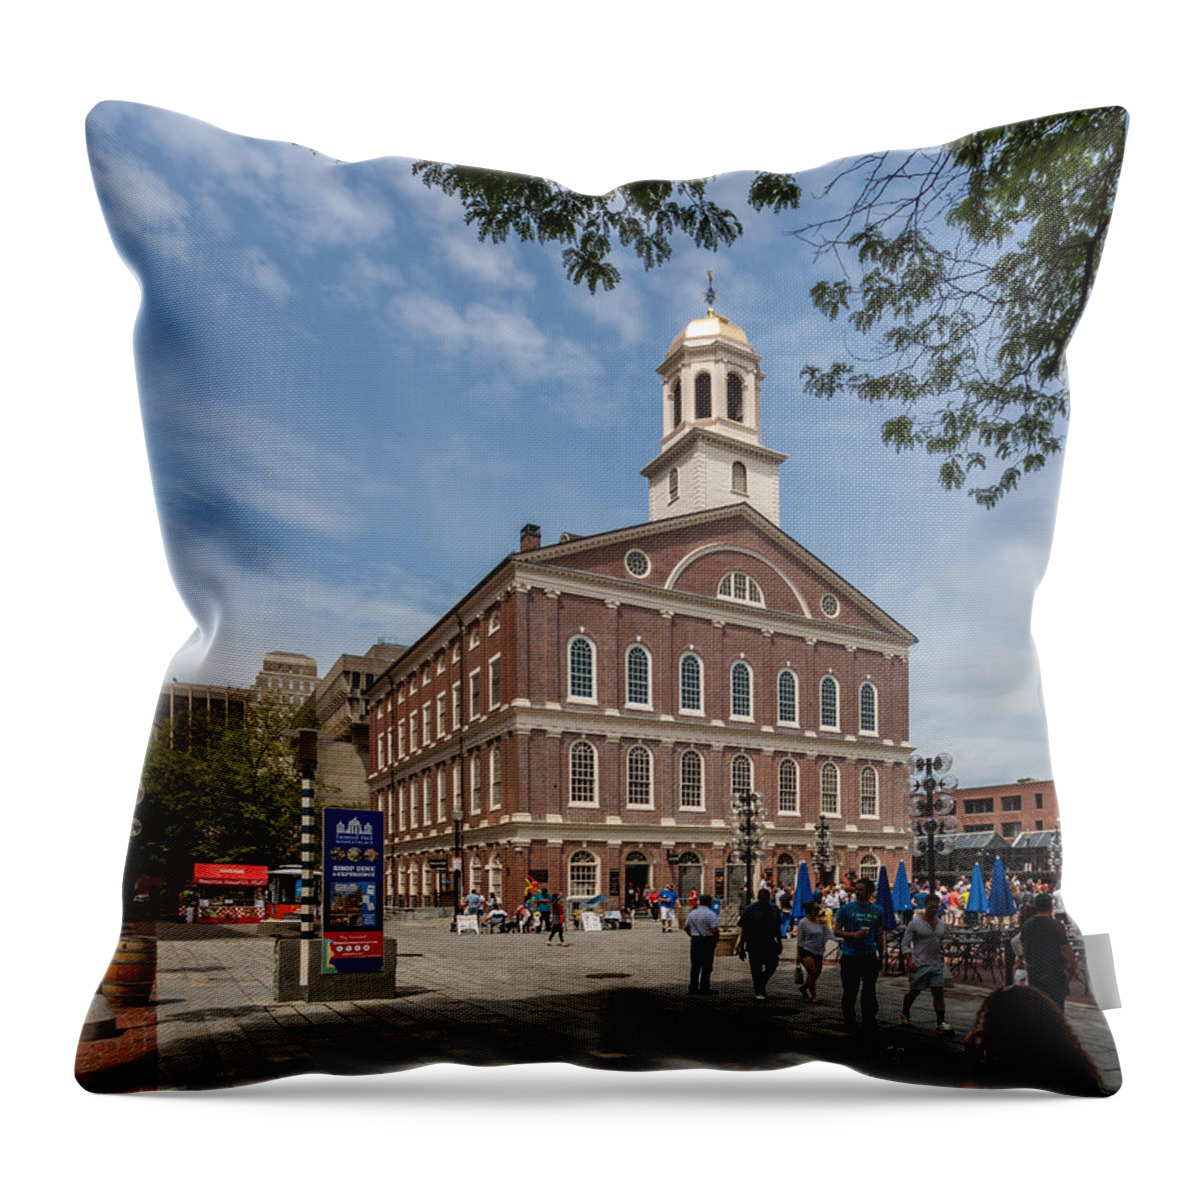 Architecture Throw Pillow featuring the photograph Faneuil Hall Boston by Brian MacLean